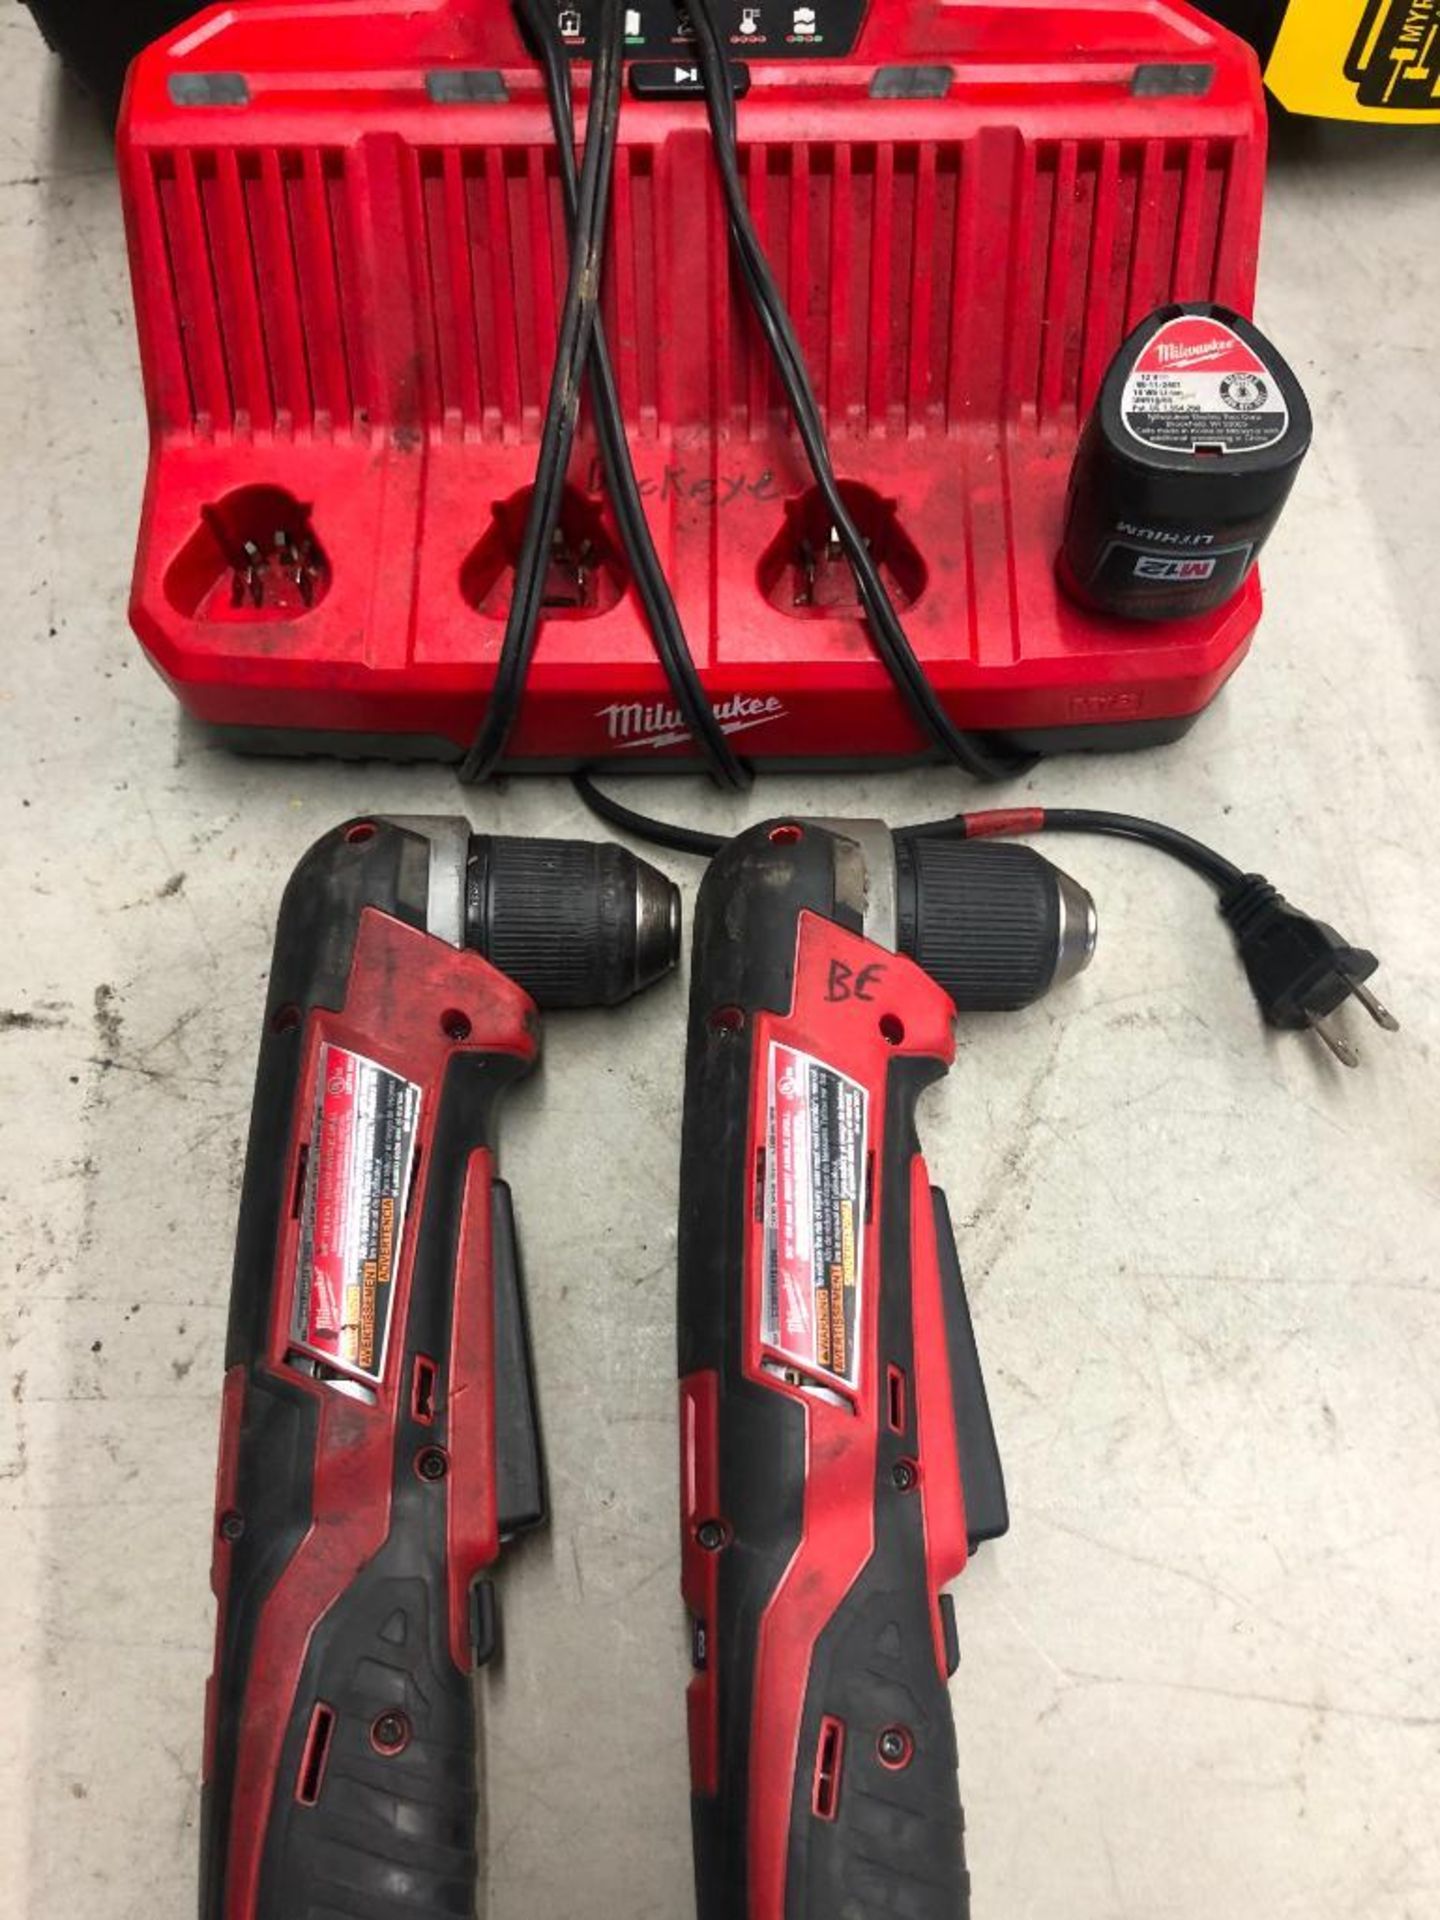 (2) MILWAUKEE CORDLESS 3/8'' RIGHT ANGLE DRILLS, W/ (1) BATTERY AND 4-STATION CHARGER